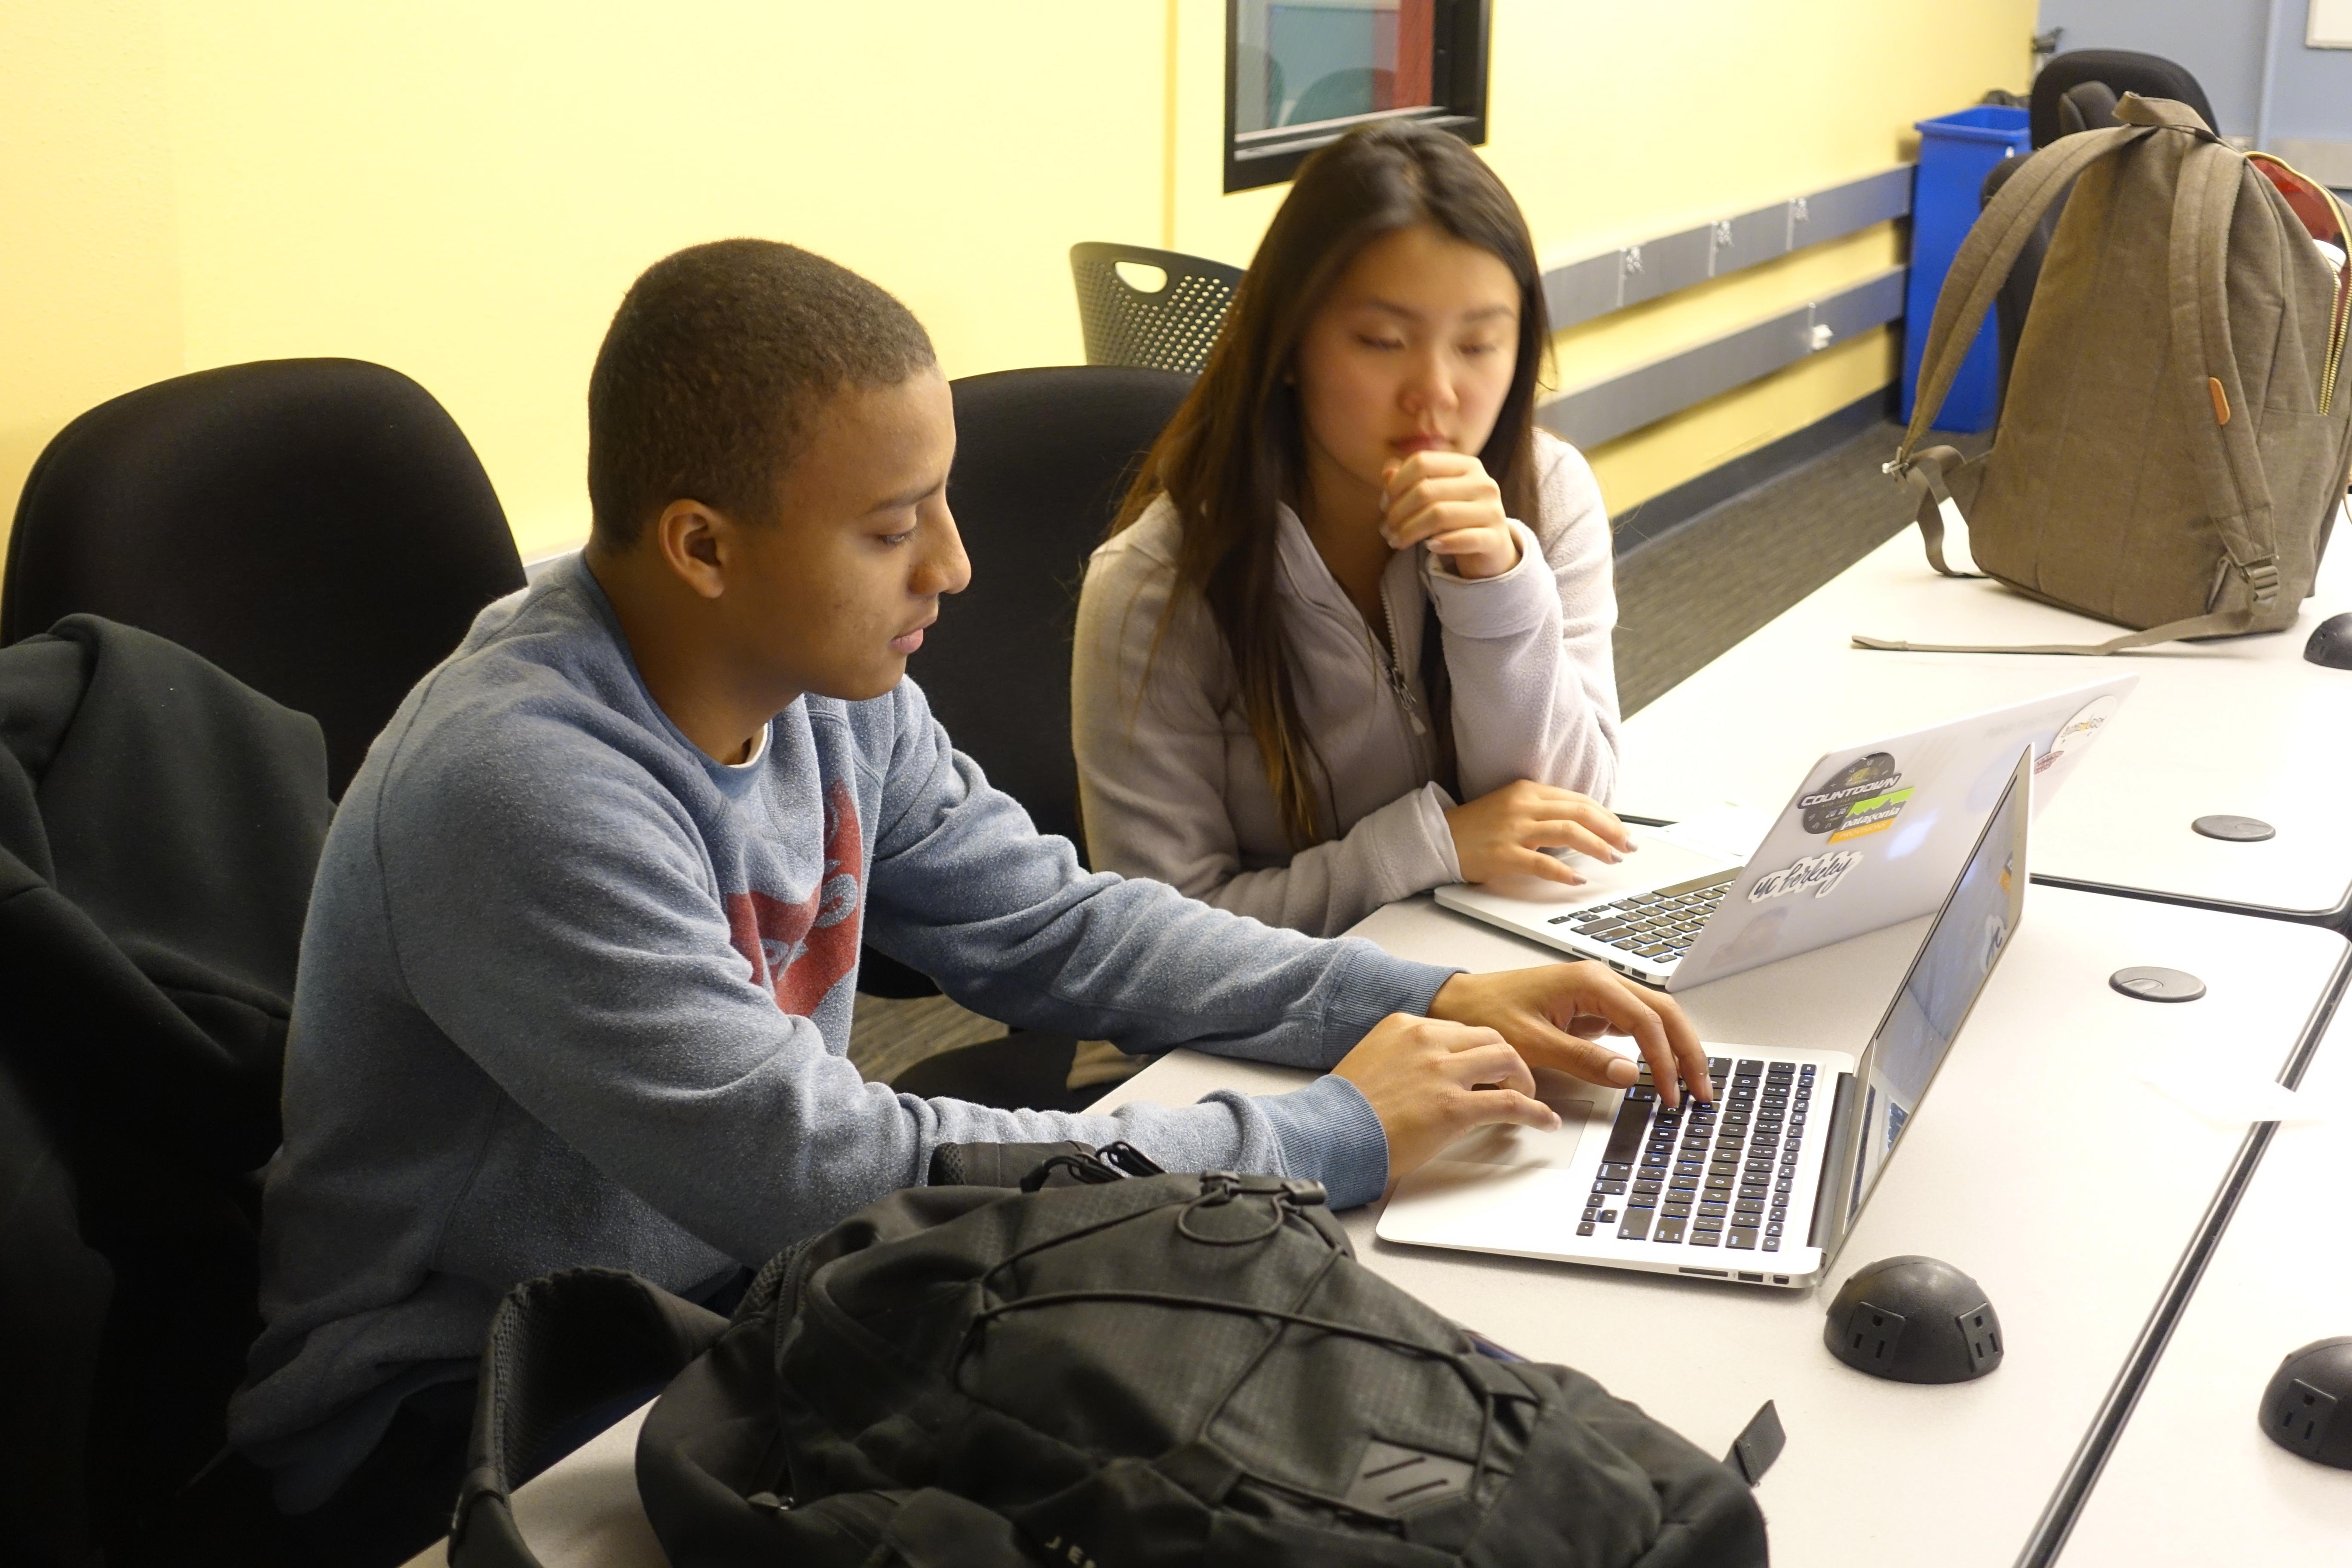 Students in Data Science module in Victoria Robinson's Ethnic Studies course